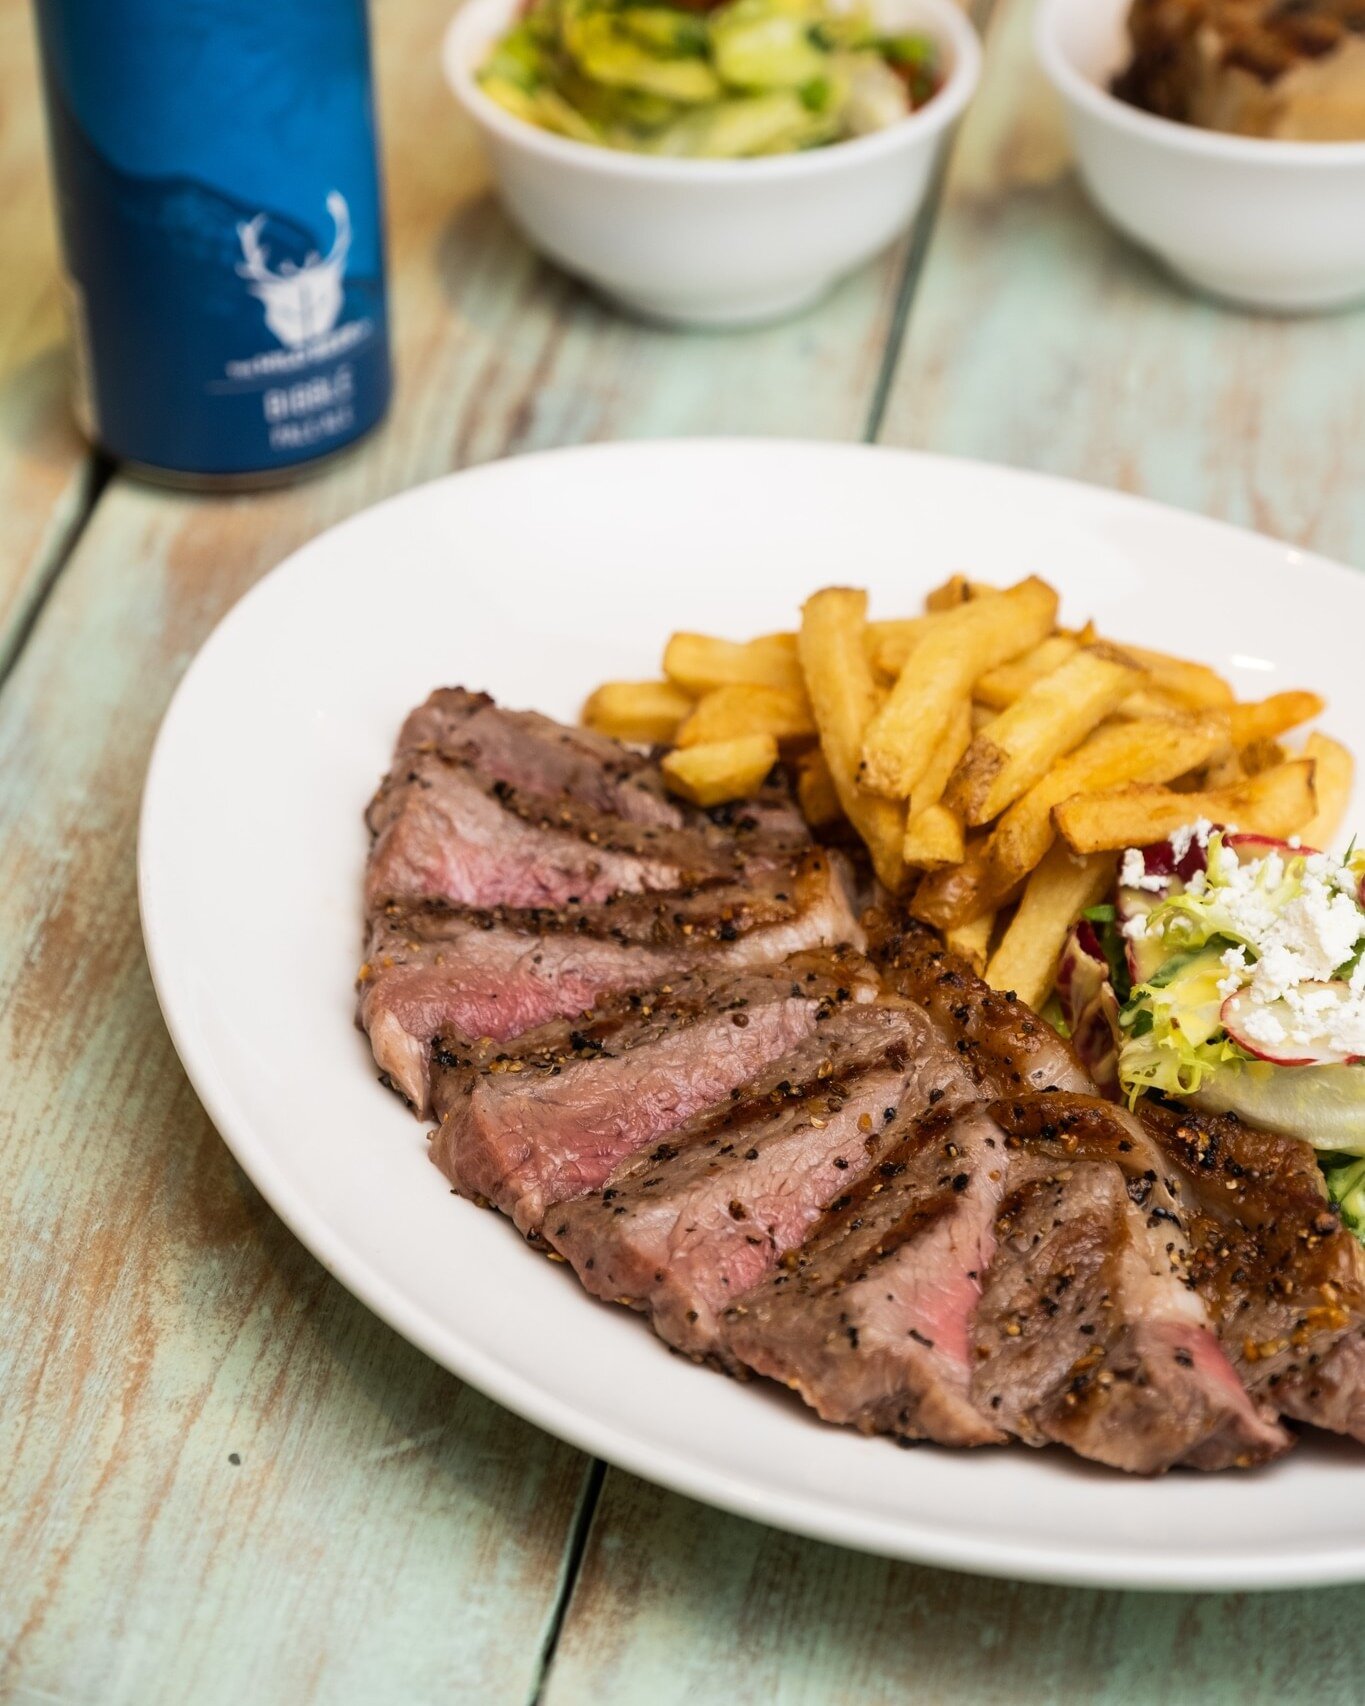 Enjoy this bank holiday with a symphony of flavours with our delectable sirloin steak, crispy fries, and crisp salad trio! It's a perfect combination of bold and rich beefy goodness with refreshing sides that will leave you wanting more 😍

Visit us 